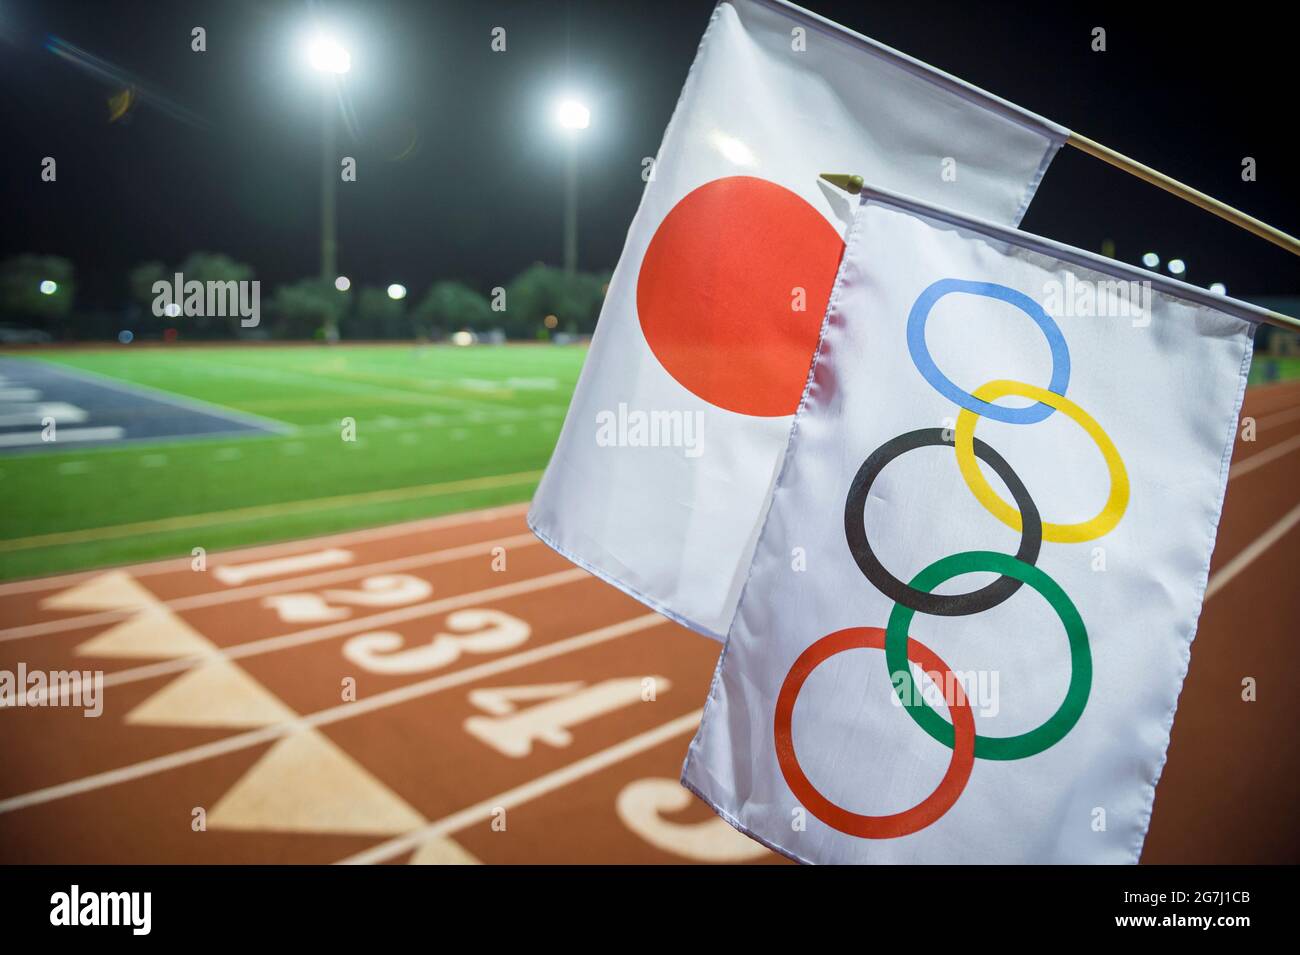 MIAMI, USA - AUGUST 15, 2019: An Olympic and Japan flag wave together under the floodlights at the starting line of a red athletics track. Stock Photo